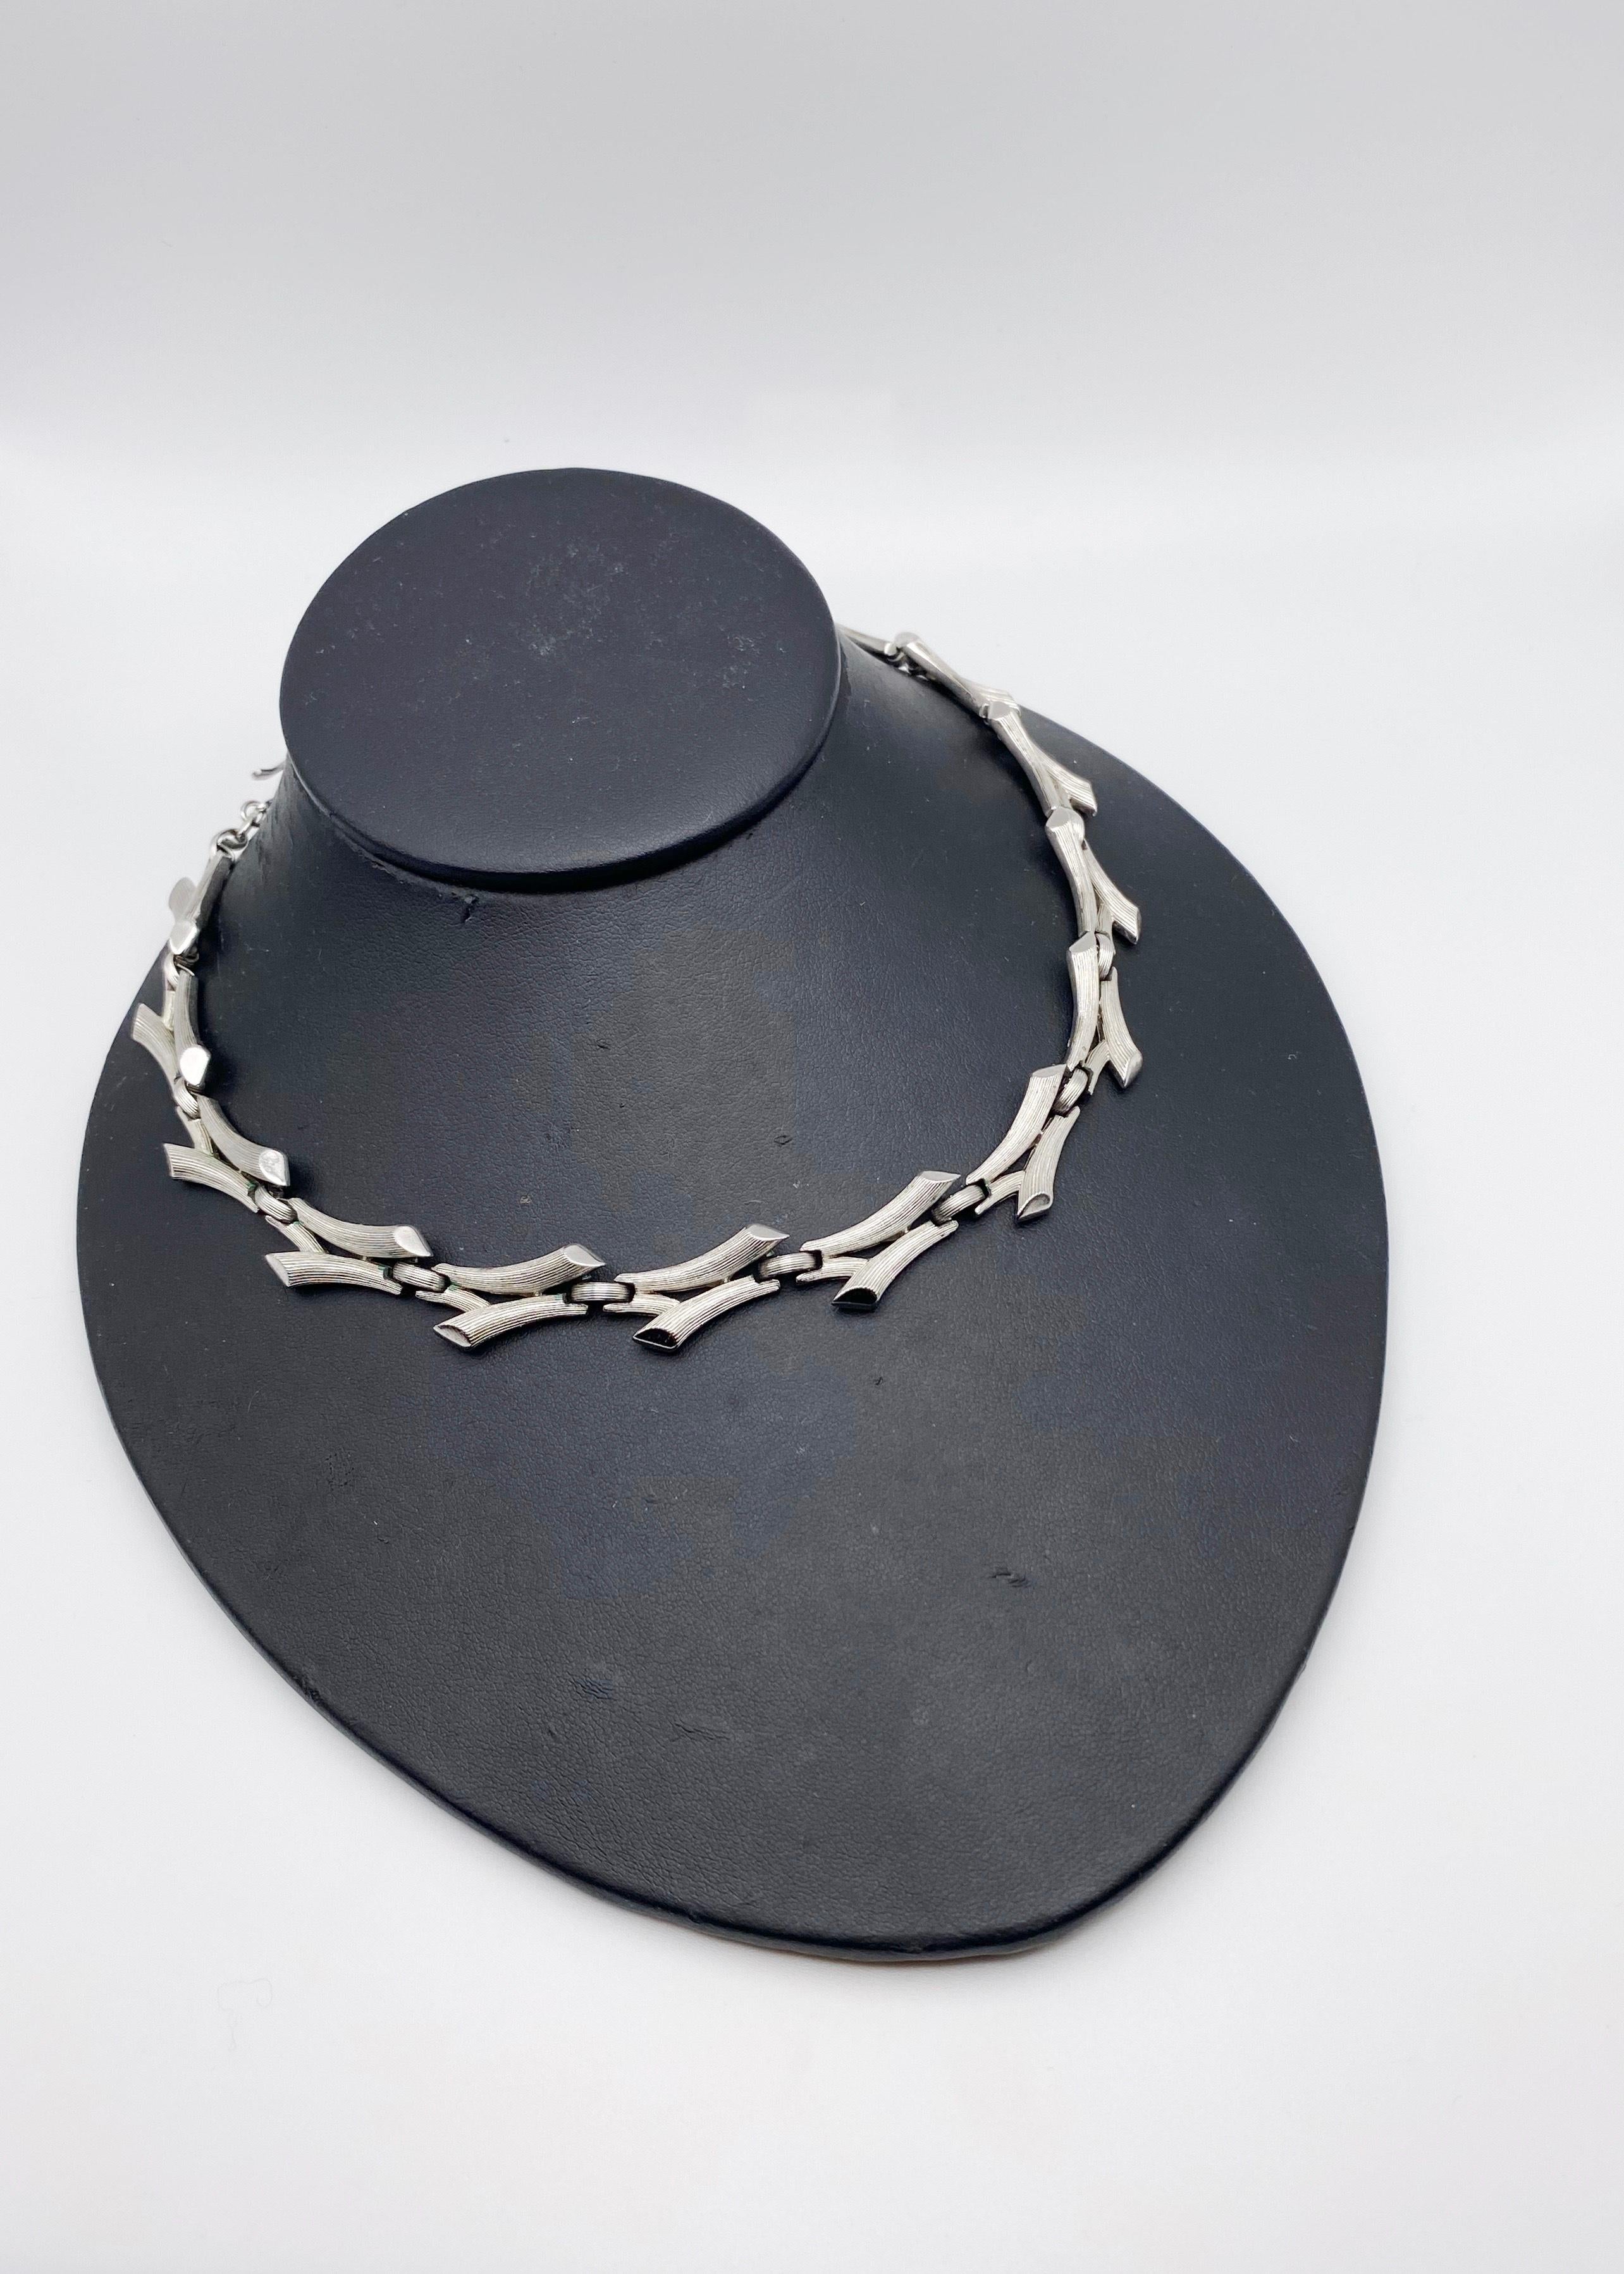 A stunning, brutalist style vintage necklace by Trifari.  As relevant today as it was yesterday. 

Circa, 1950s/60s
Signed: Trifari
Materials: Silvertone
Size: 41cm in length x 1cm wide.
Adjustable to a smaller length
Condition: Excellent